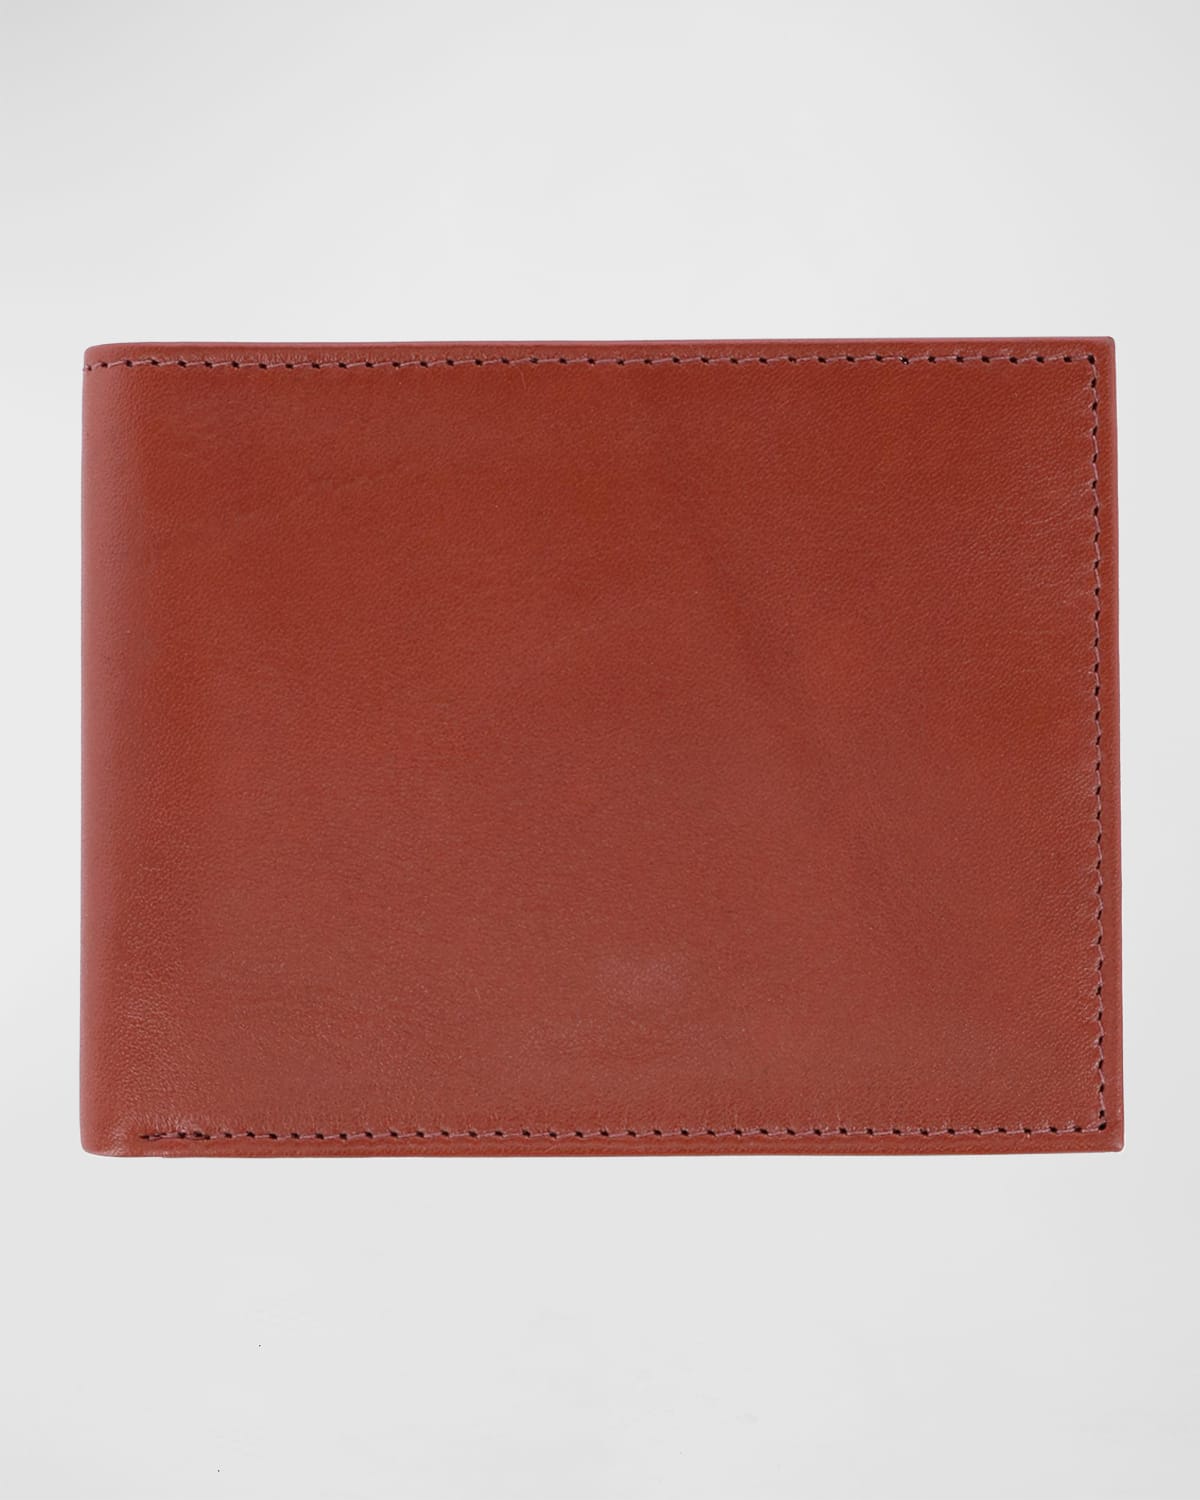 Men's Sergio Leather RFID Bifold Wallet with ID Slot